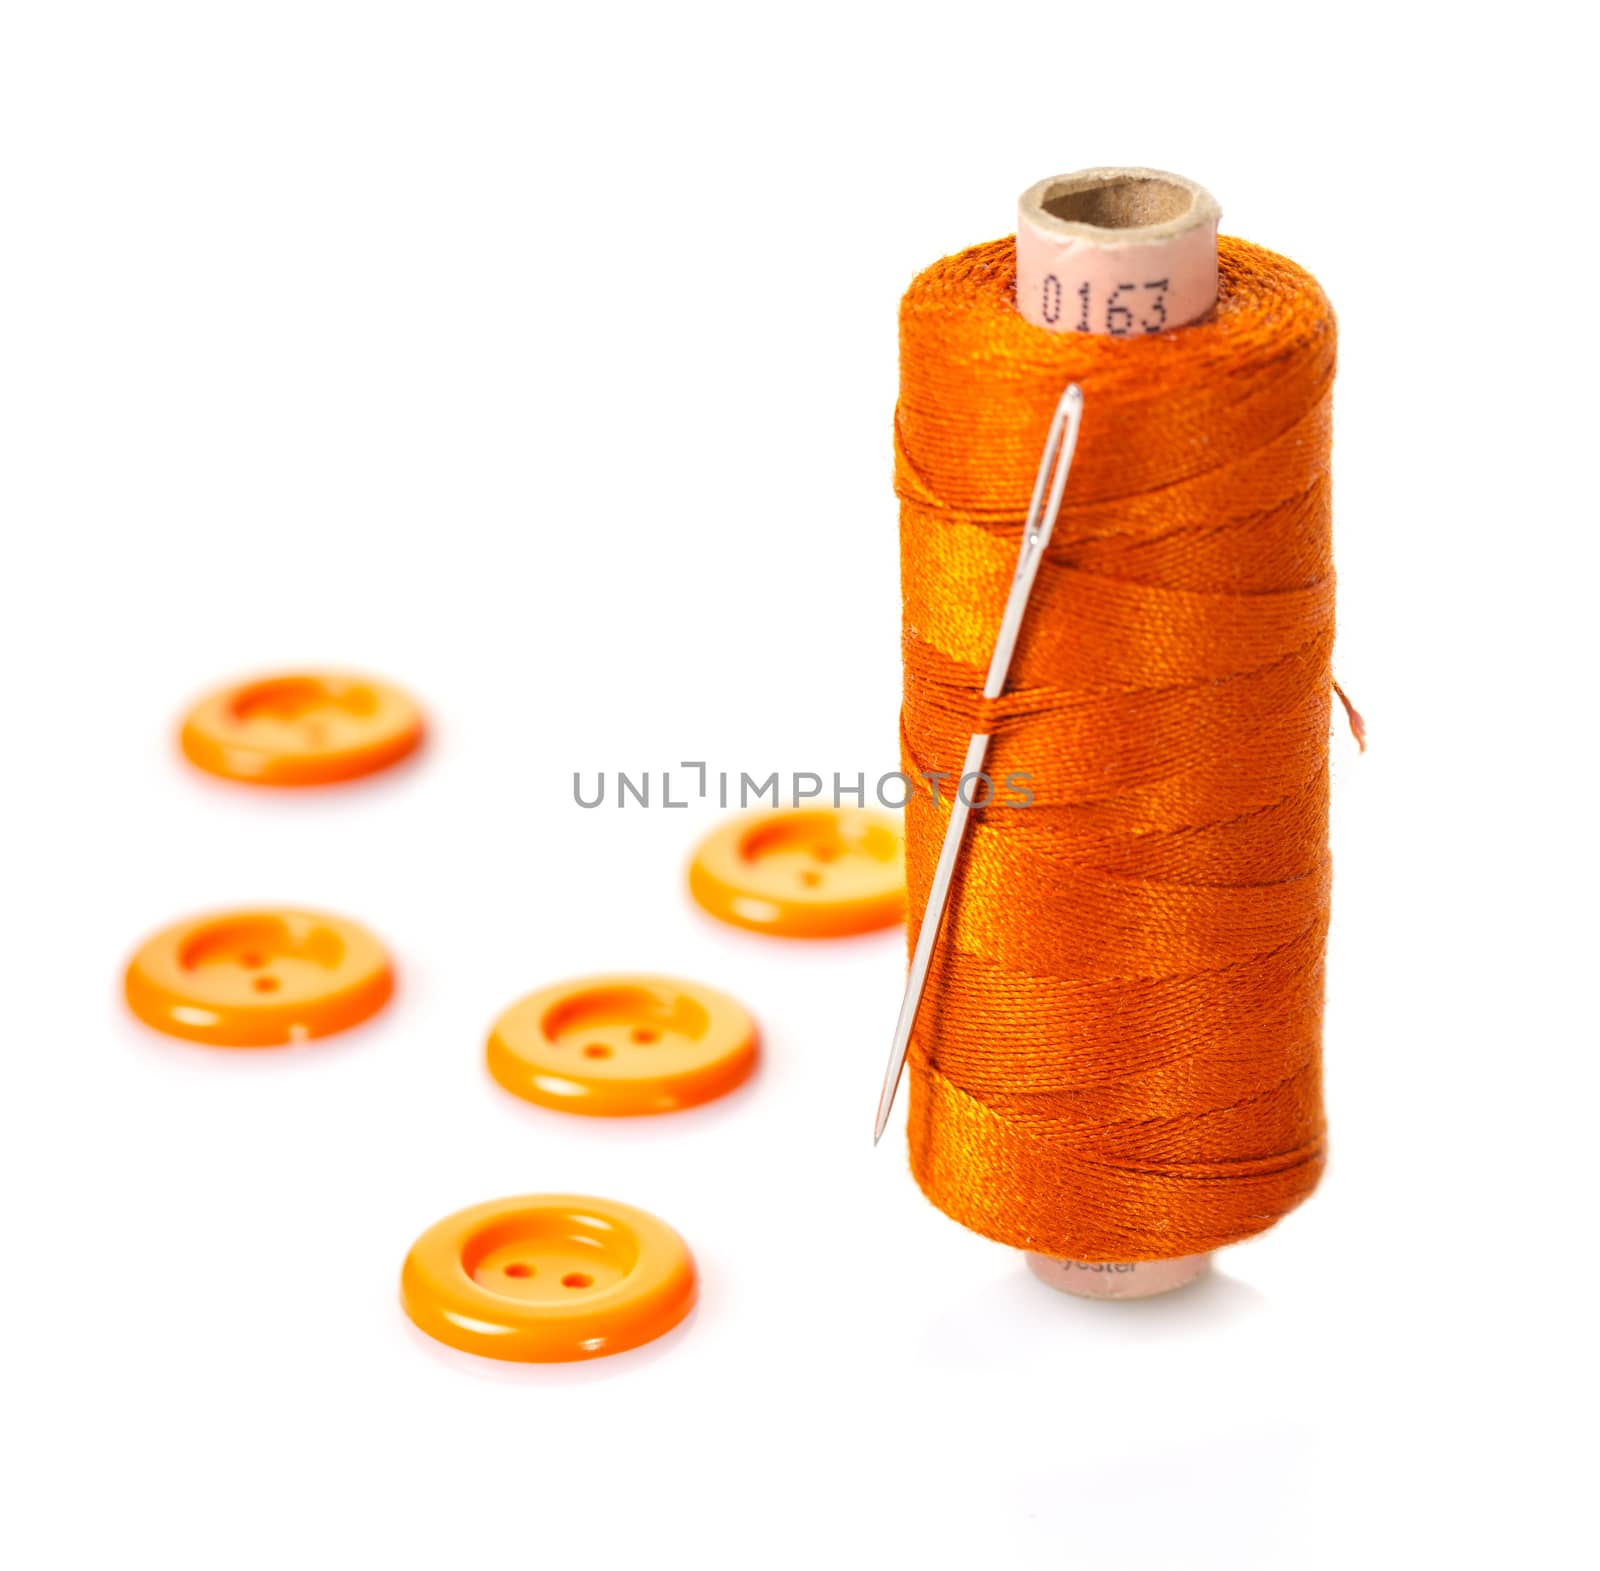 spool of thread and buttons  by MegaArt